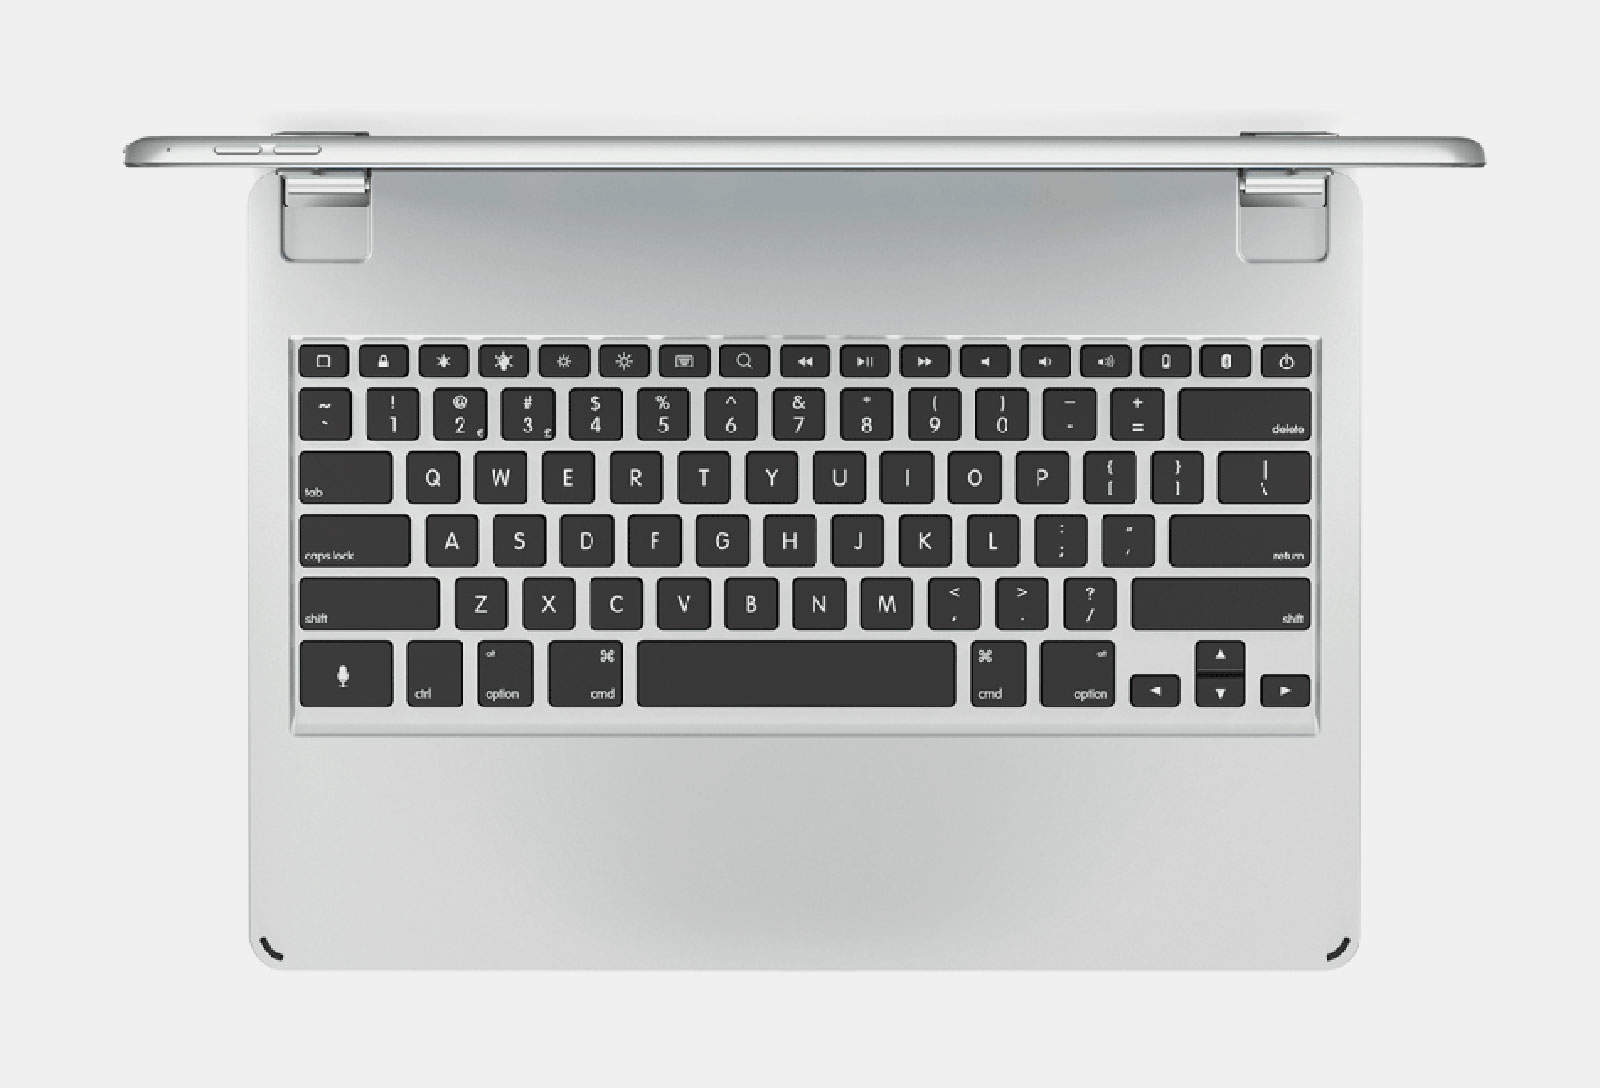 The BrydgePro keyboard for the iPad Pro.